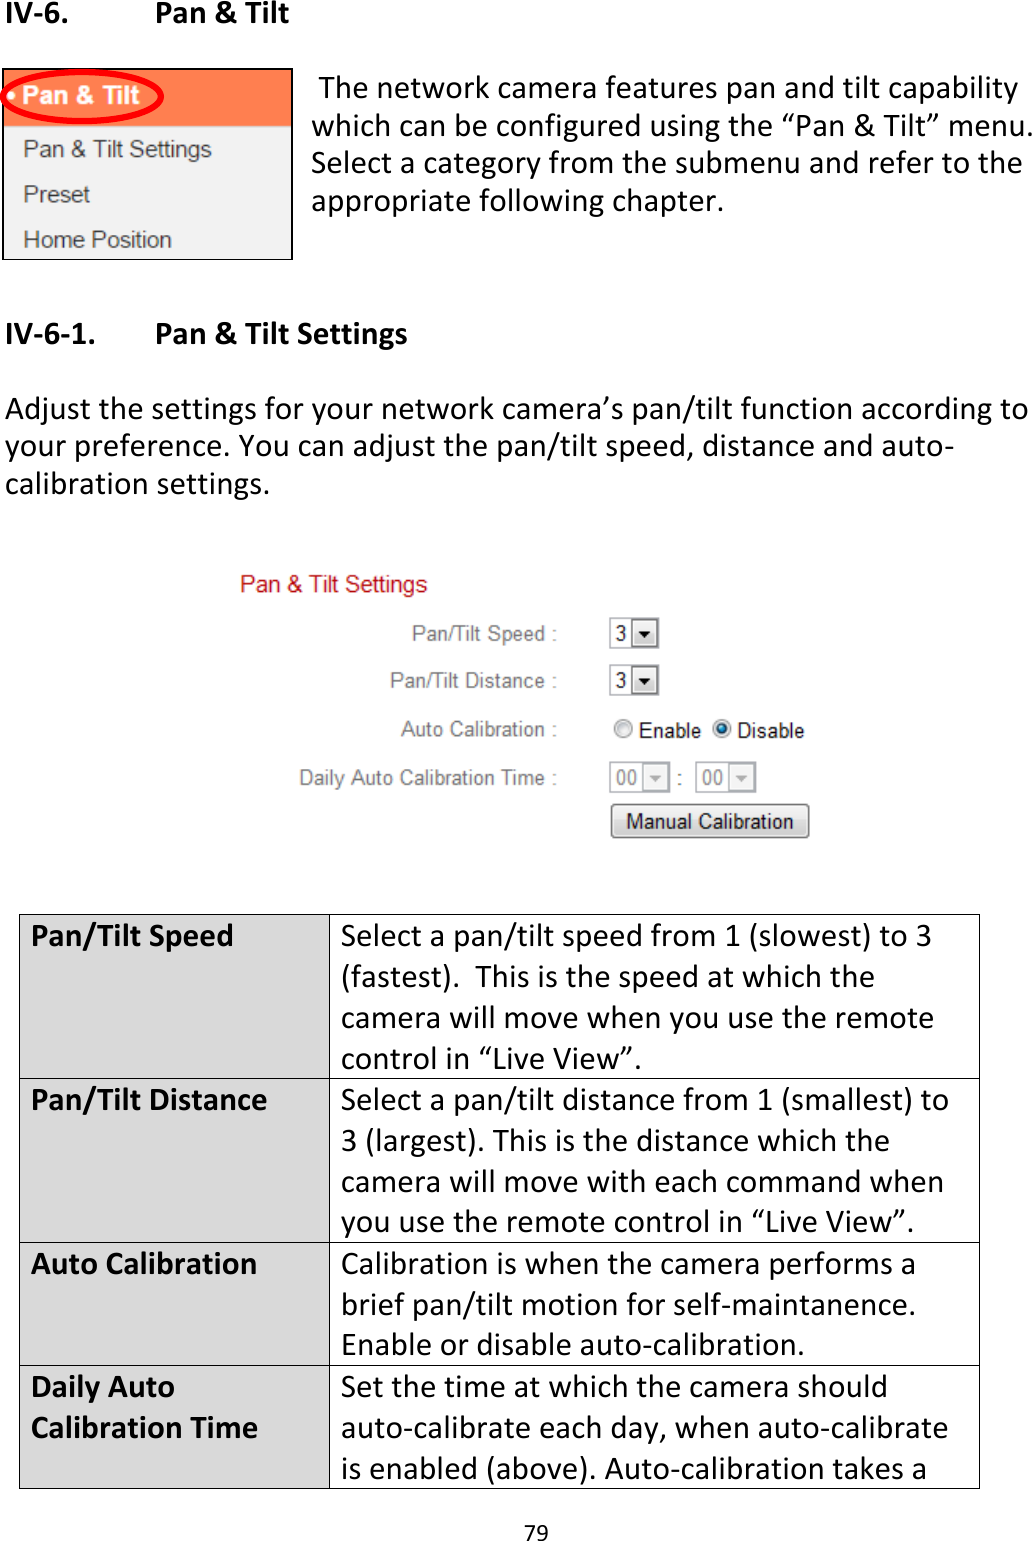 79  IV-6.    Pan &amp; Tilt   The network camera features pan and tilt capability which can be configured using the “Pan &amp; Tilt” menu. Select a category from the submenu and refer to the appropriate following chapter.   IV-6-1.   Pan &amp; Tilt Settings  Adjust the settings for your network camera’s pan/tilt function according to your preference. You can adjust the pan/tilt speed, distance and auto-calibration settings.    Pan/Tilt Speed Select a pan/tilt speed from 1 (slowest) to 3 (fastest).  This is the speed at which the camera will move when you use the remote control in “Live View”. Pan/Tilt Distance Select a pan/tilt distance from 1 (smallest) to 3 (largest). This is the distance which the camera will move with each command when you use the remote control in “Live View”. Auto Calibration Calibration is when the camera performs a brief pan/tilt motion for self-maintanence. Enable or disable auto-calibration. Daily Auto Calibration Time Set the time at which the camera should auto-calibrate each day, when auto-calibrate is enabled (above). Auto-calibration takes a 